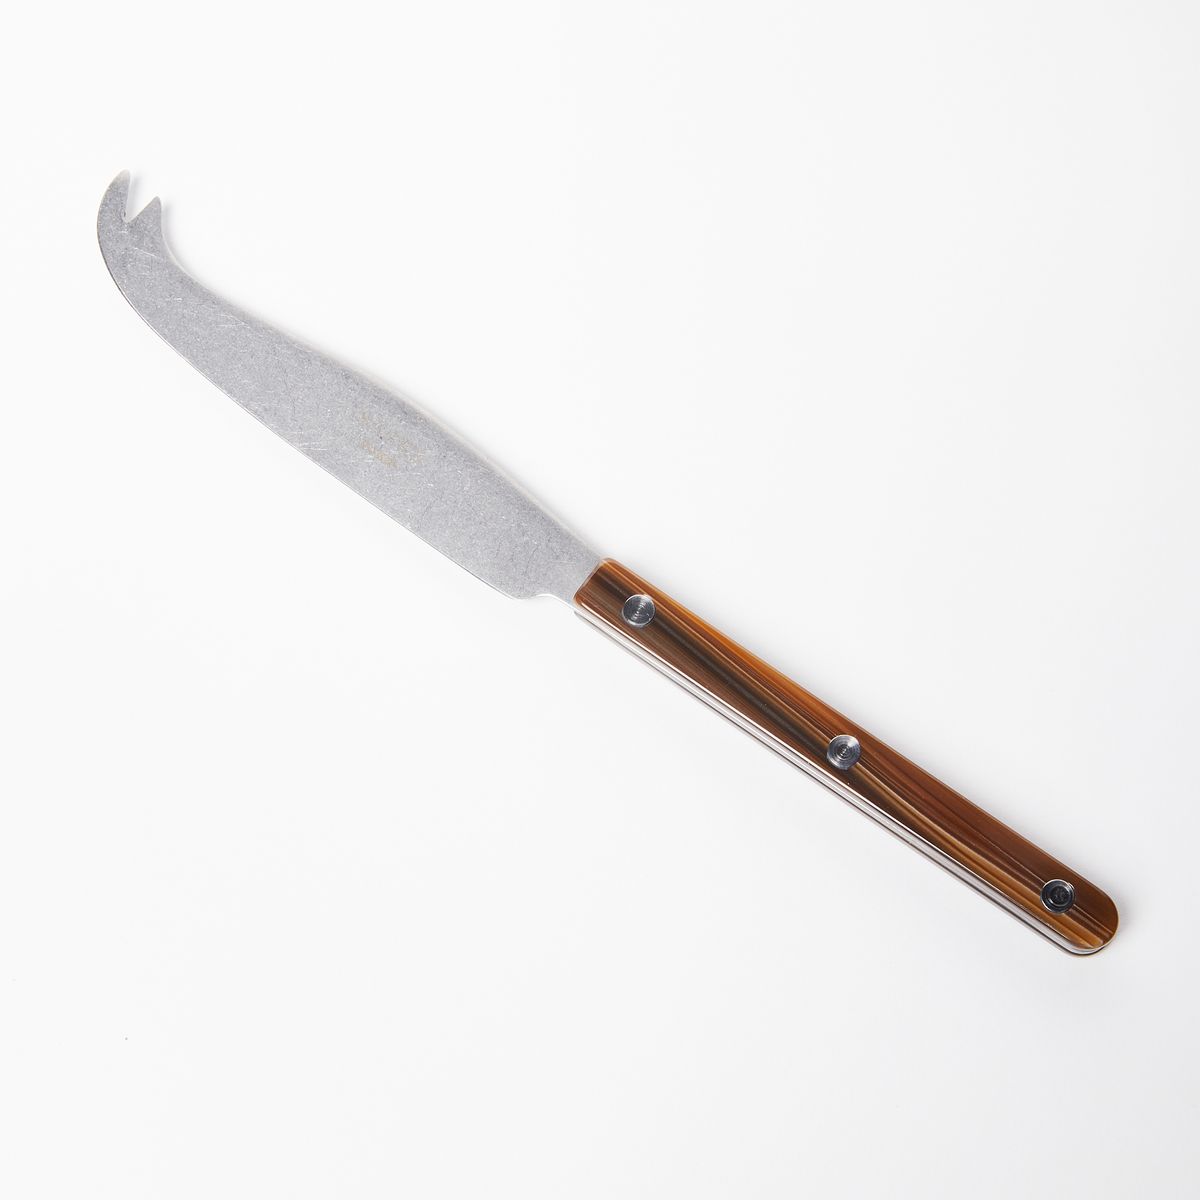 A stylish long and thin cheese knife with a brown acrylic handle and a scooped tip